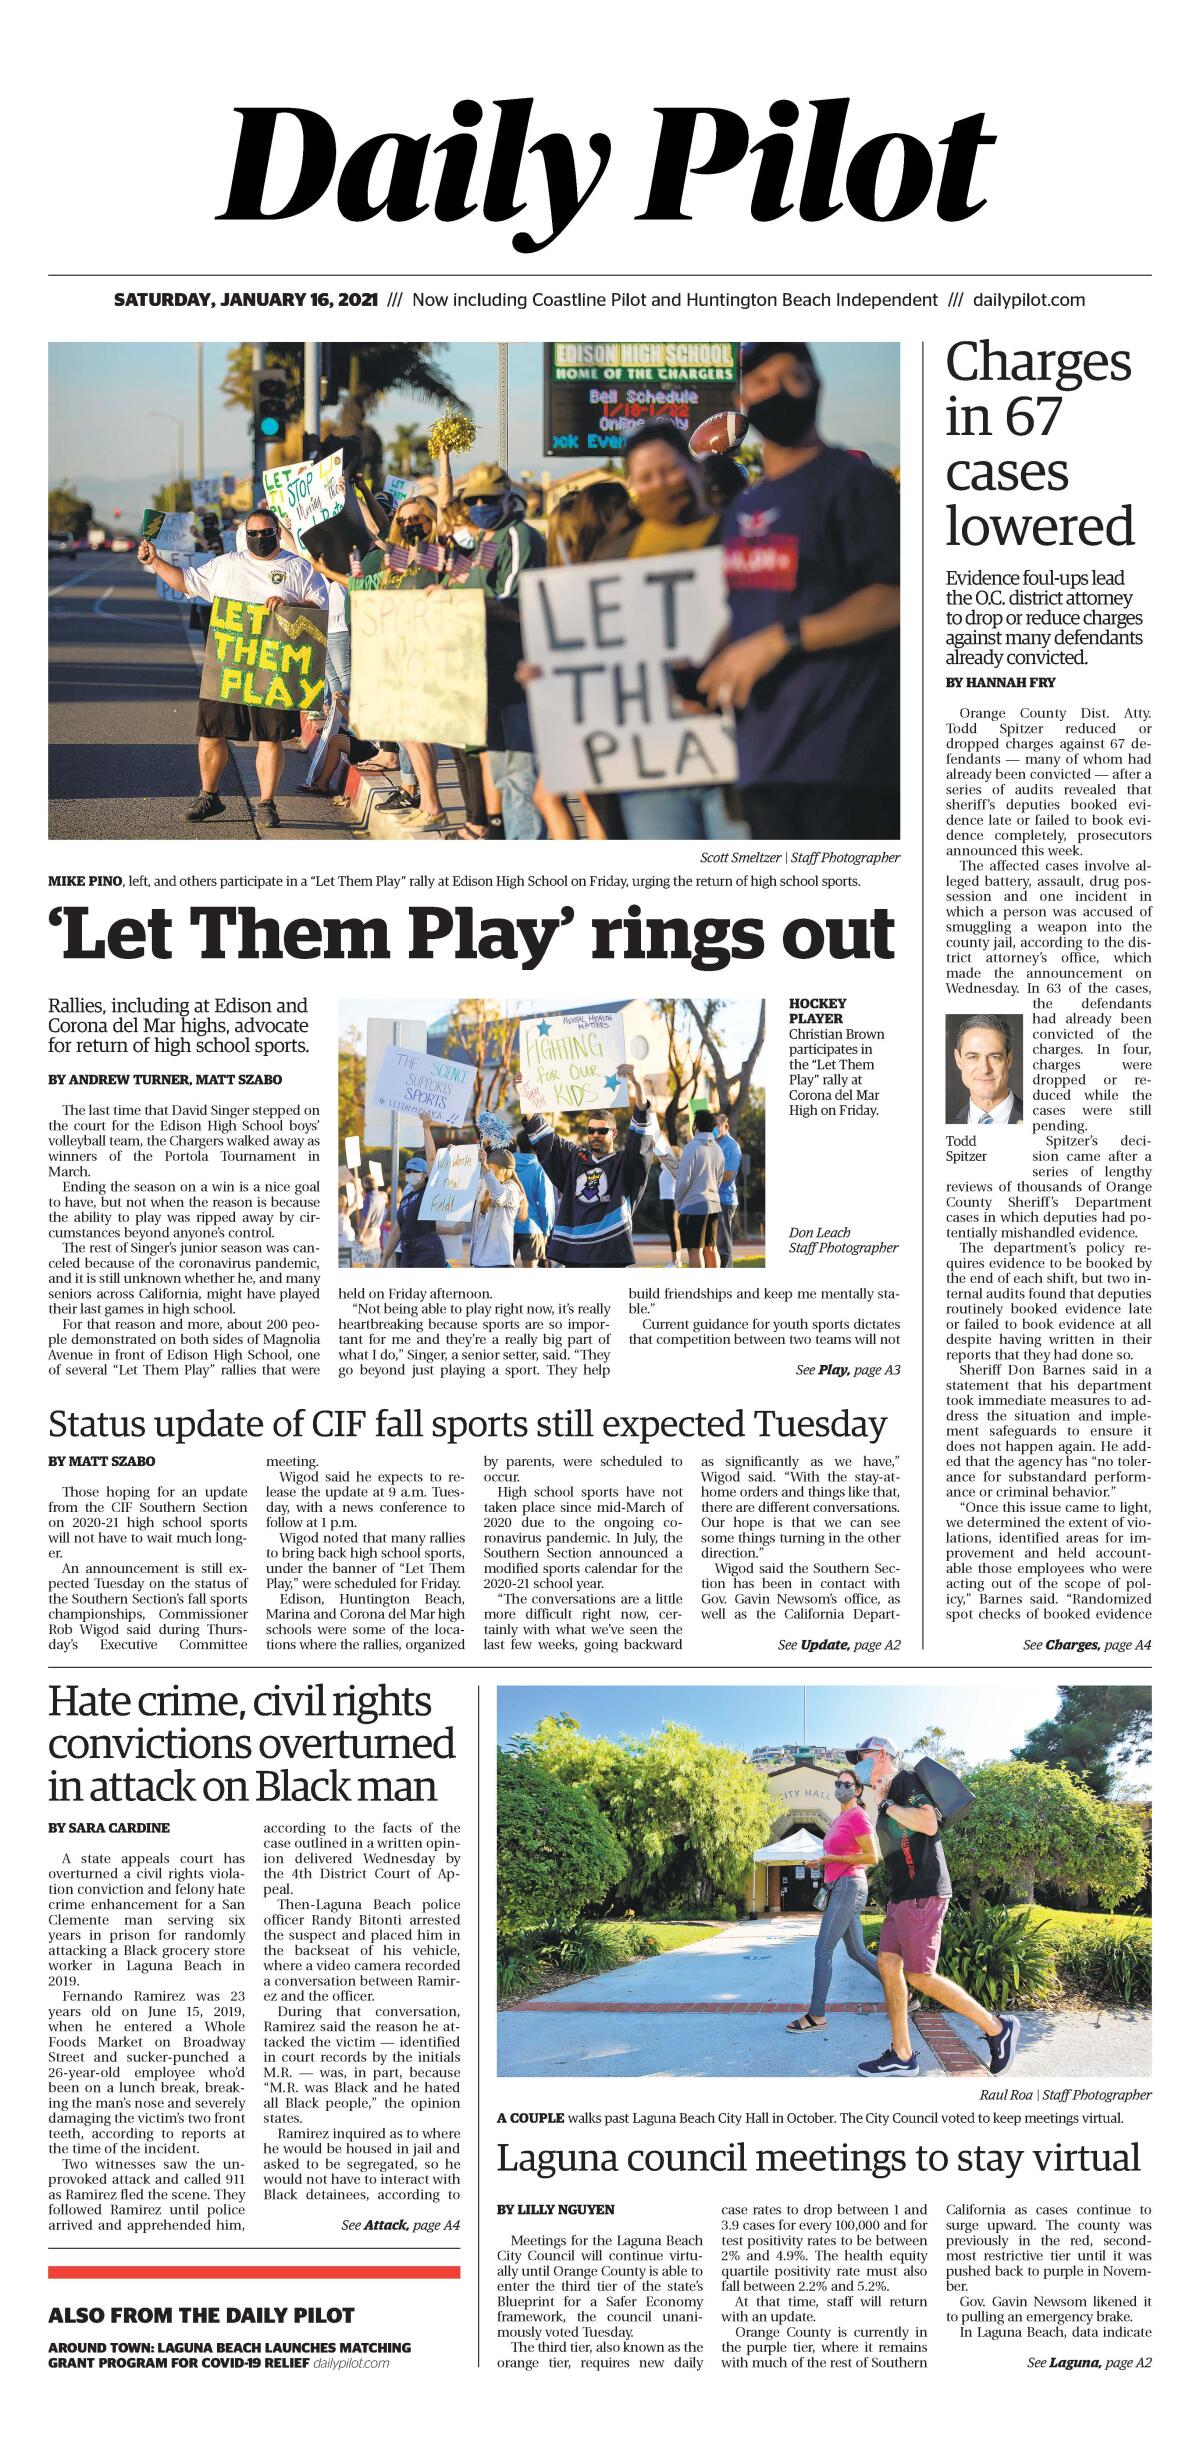 Front page of Saturday's Daily Pilot.